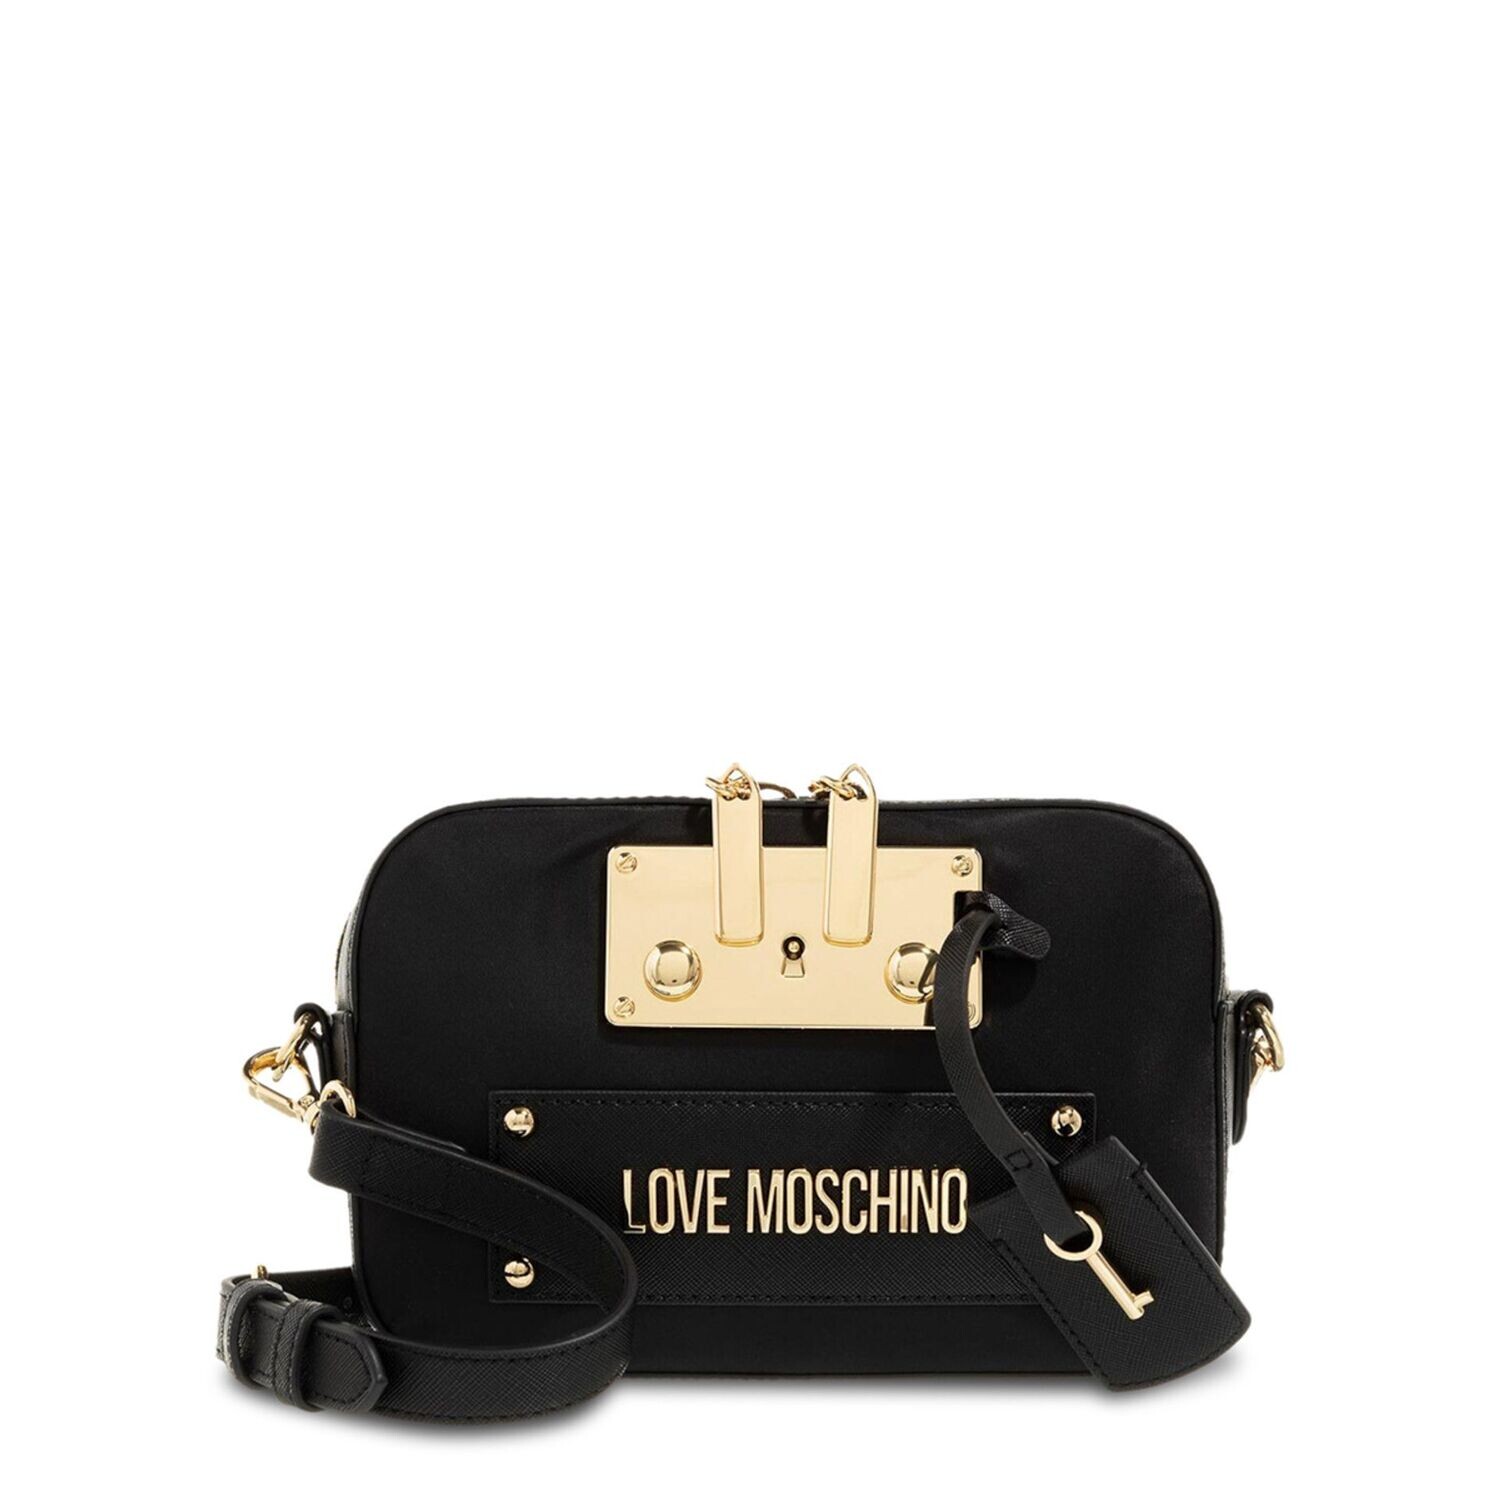 Love Moschino Black And Gold Cross Body Bag, size: NOSIZE